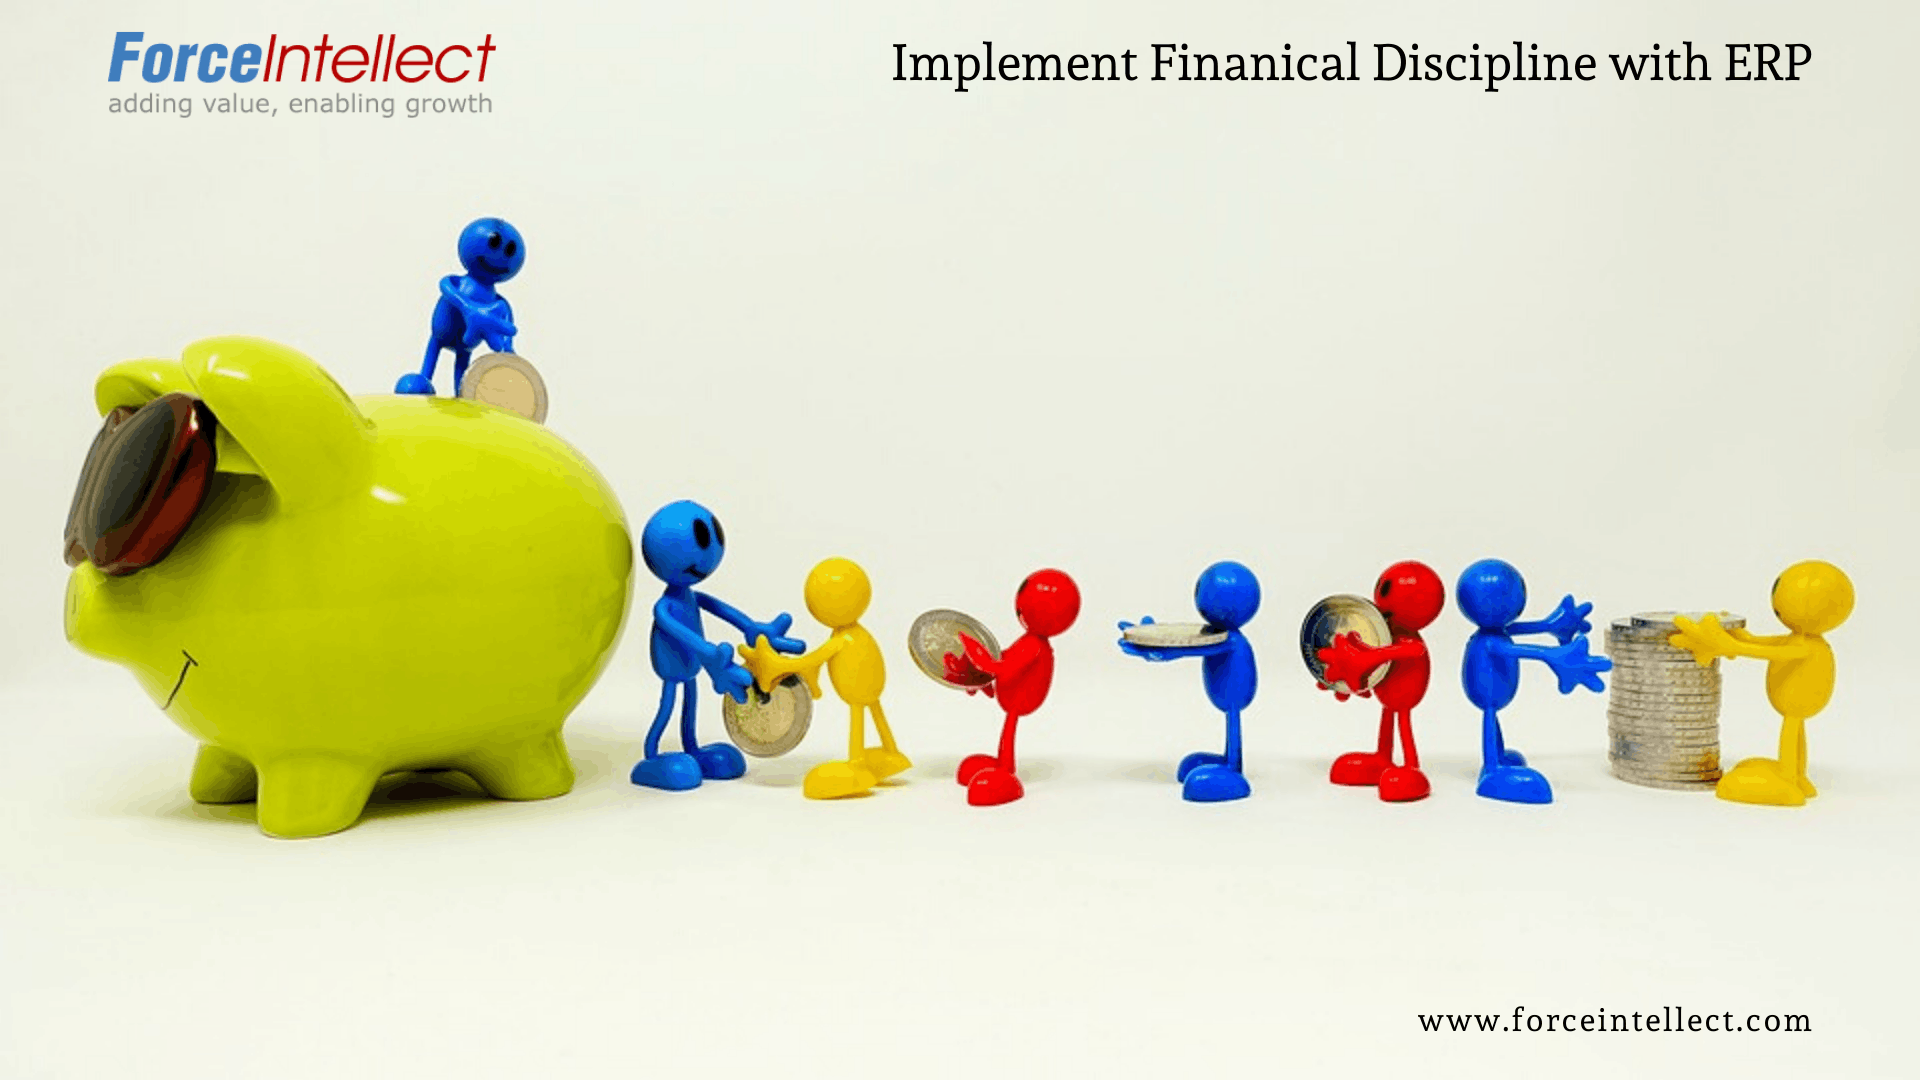 Implement Financial Discipline with ERP